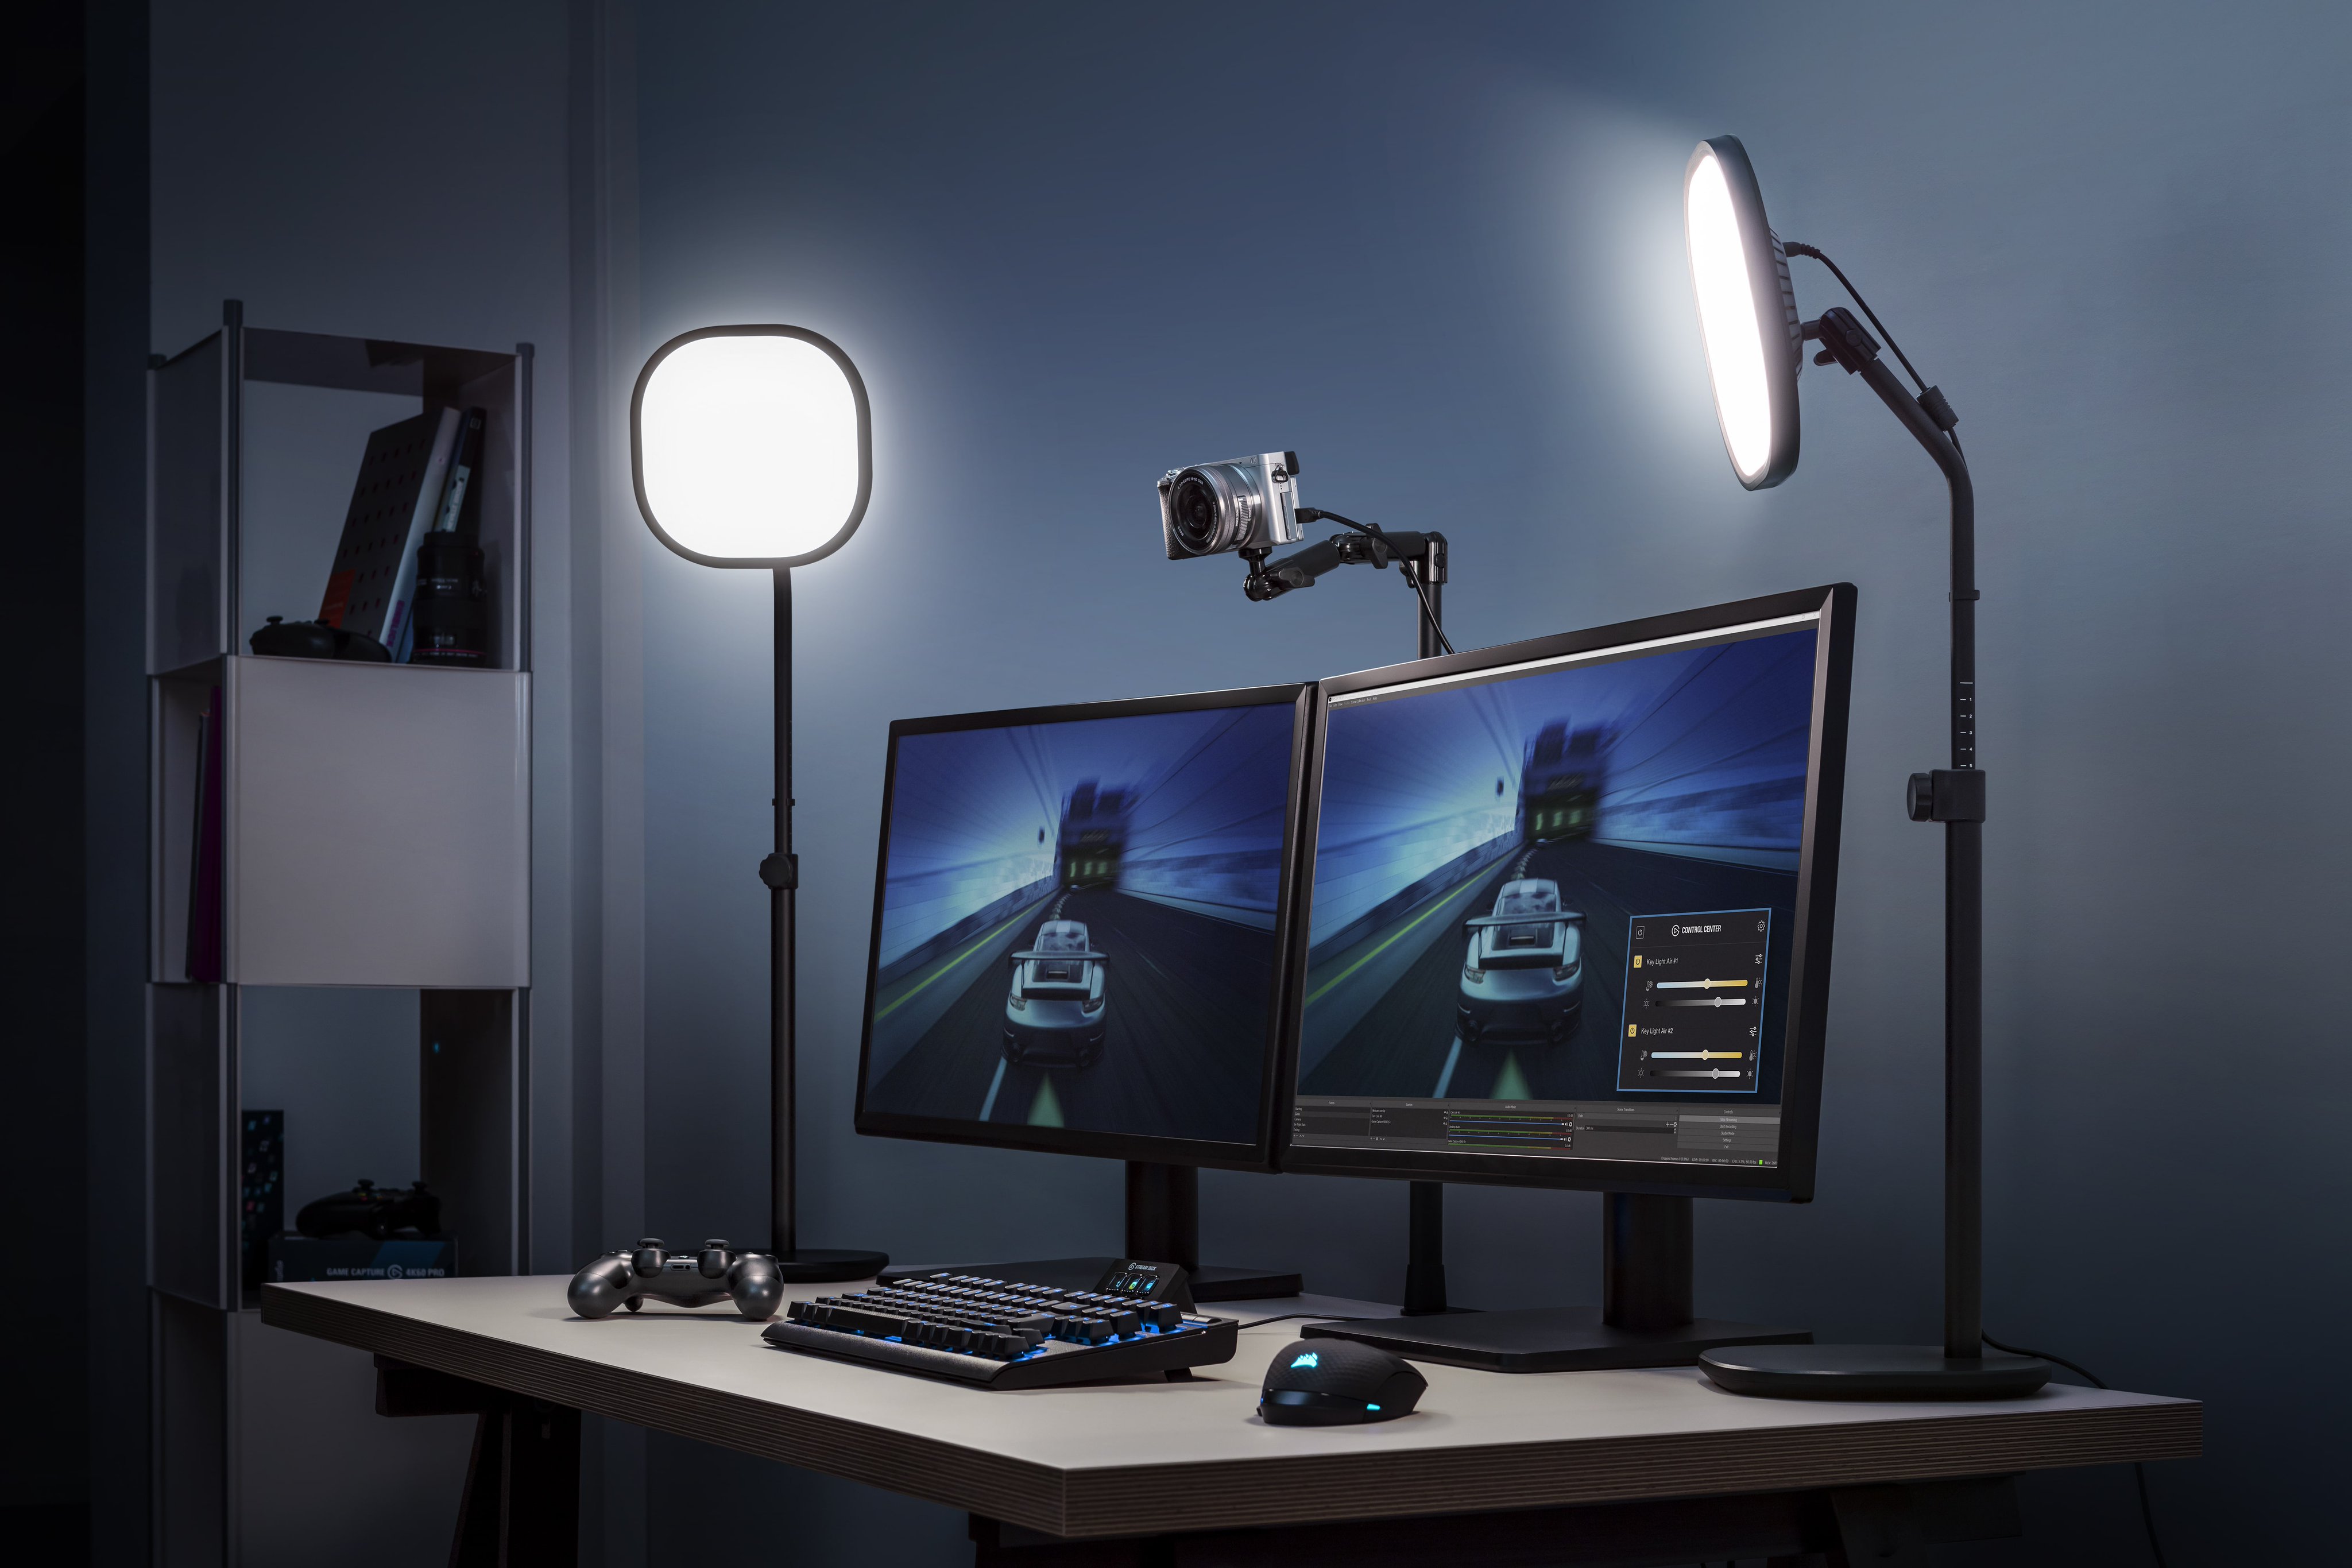 Elgato on Twitter: "@PreFirezTV @ElgatoSupport The Key Light Air comes with a desk It is however compatible with Multi Mount and the desk clamp. This image shows the desk stand. To